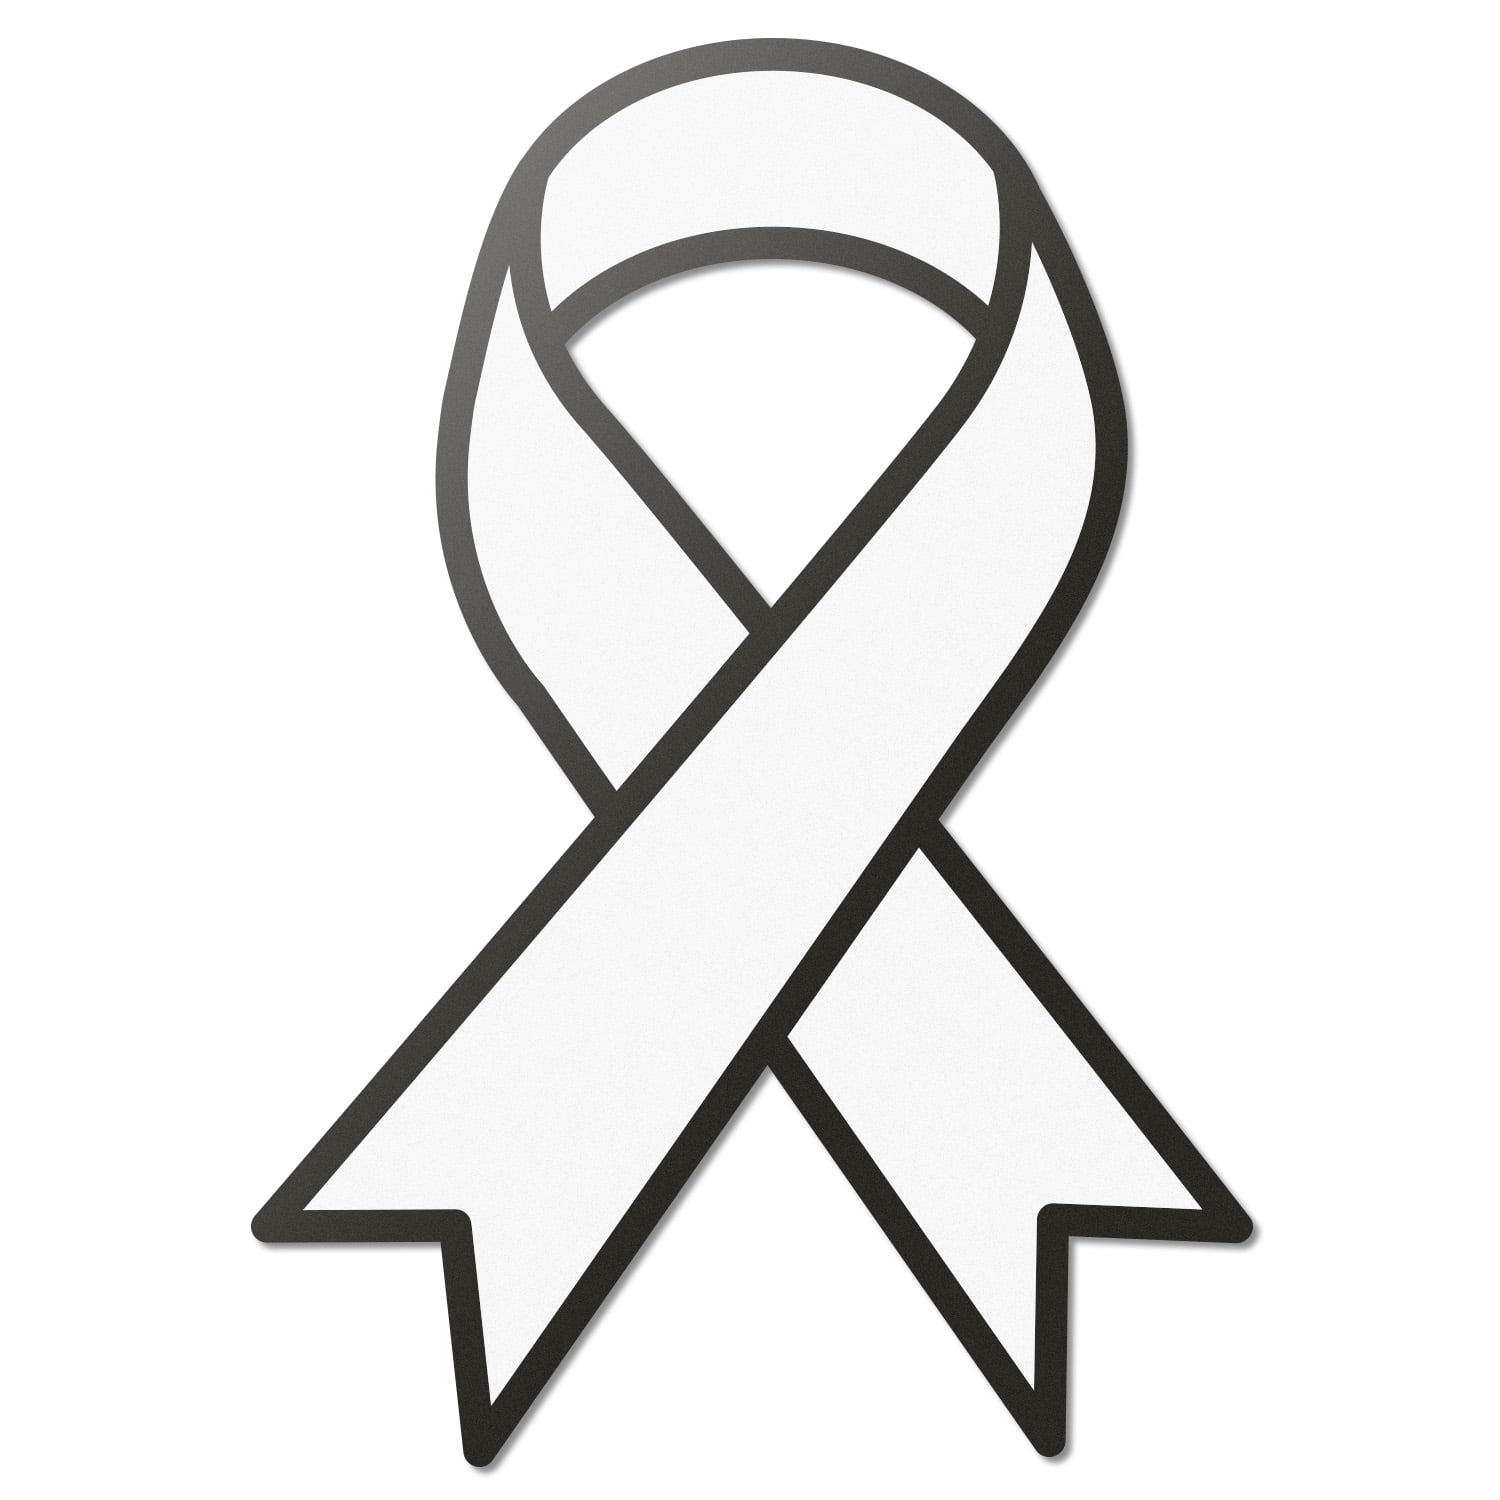 Lung Cancer Awareness Ribbon Vinyl Decal You Choose Size 4"-54" 